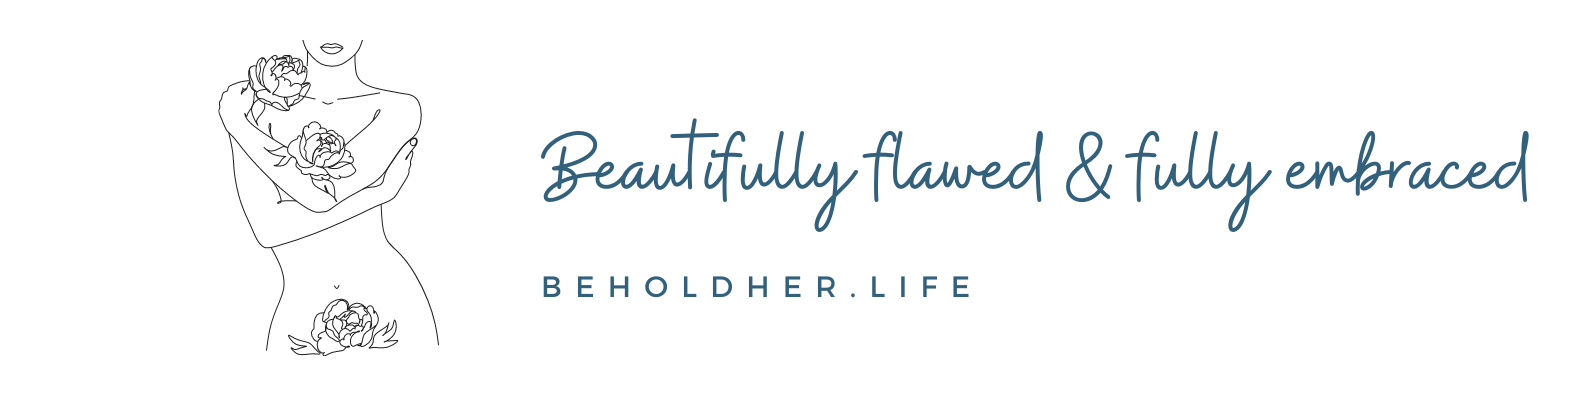 Beautifully Flawed and Fully Embraced | beholdher.life